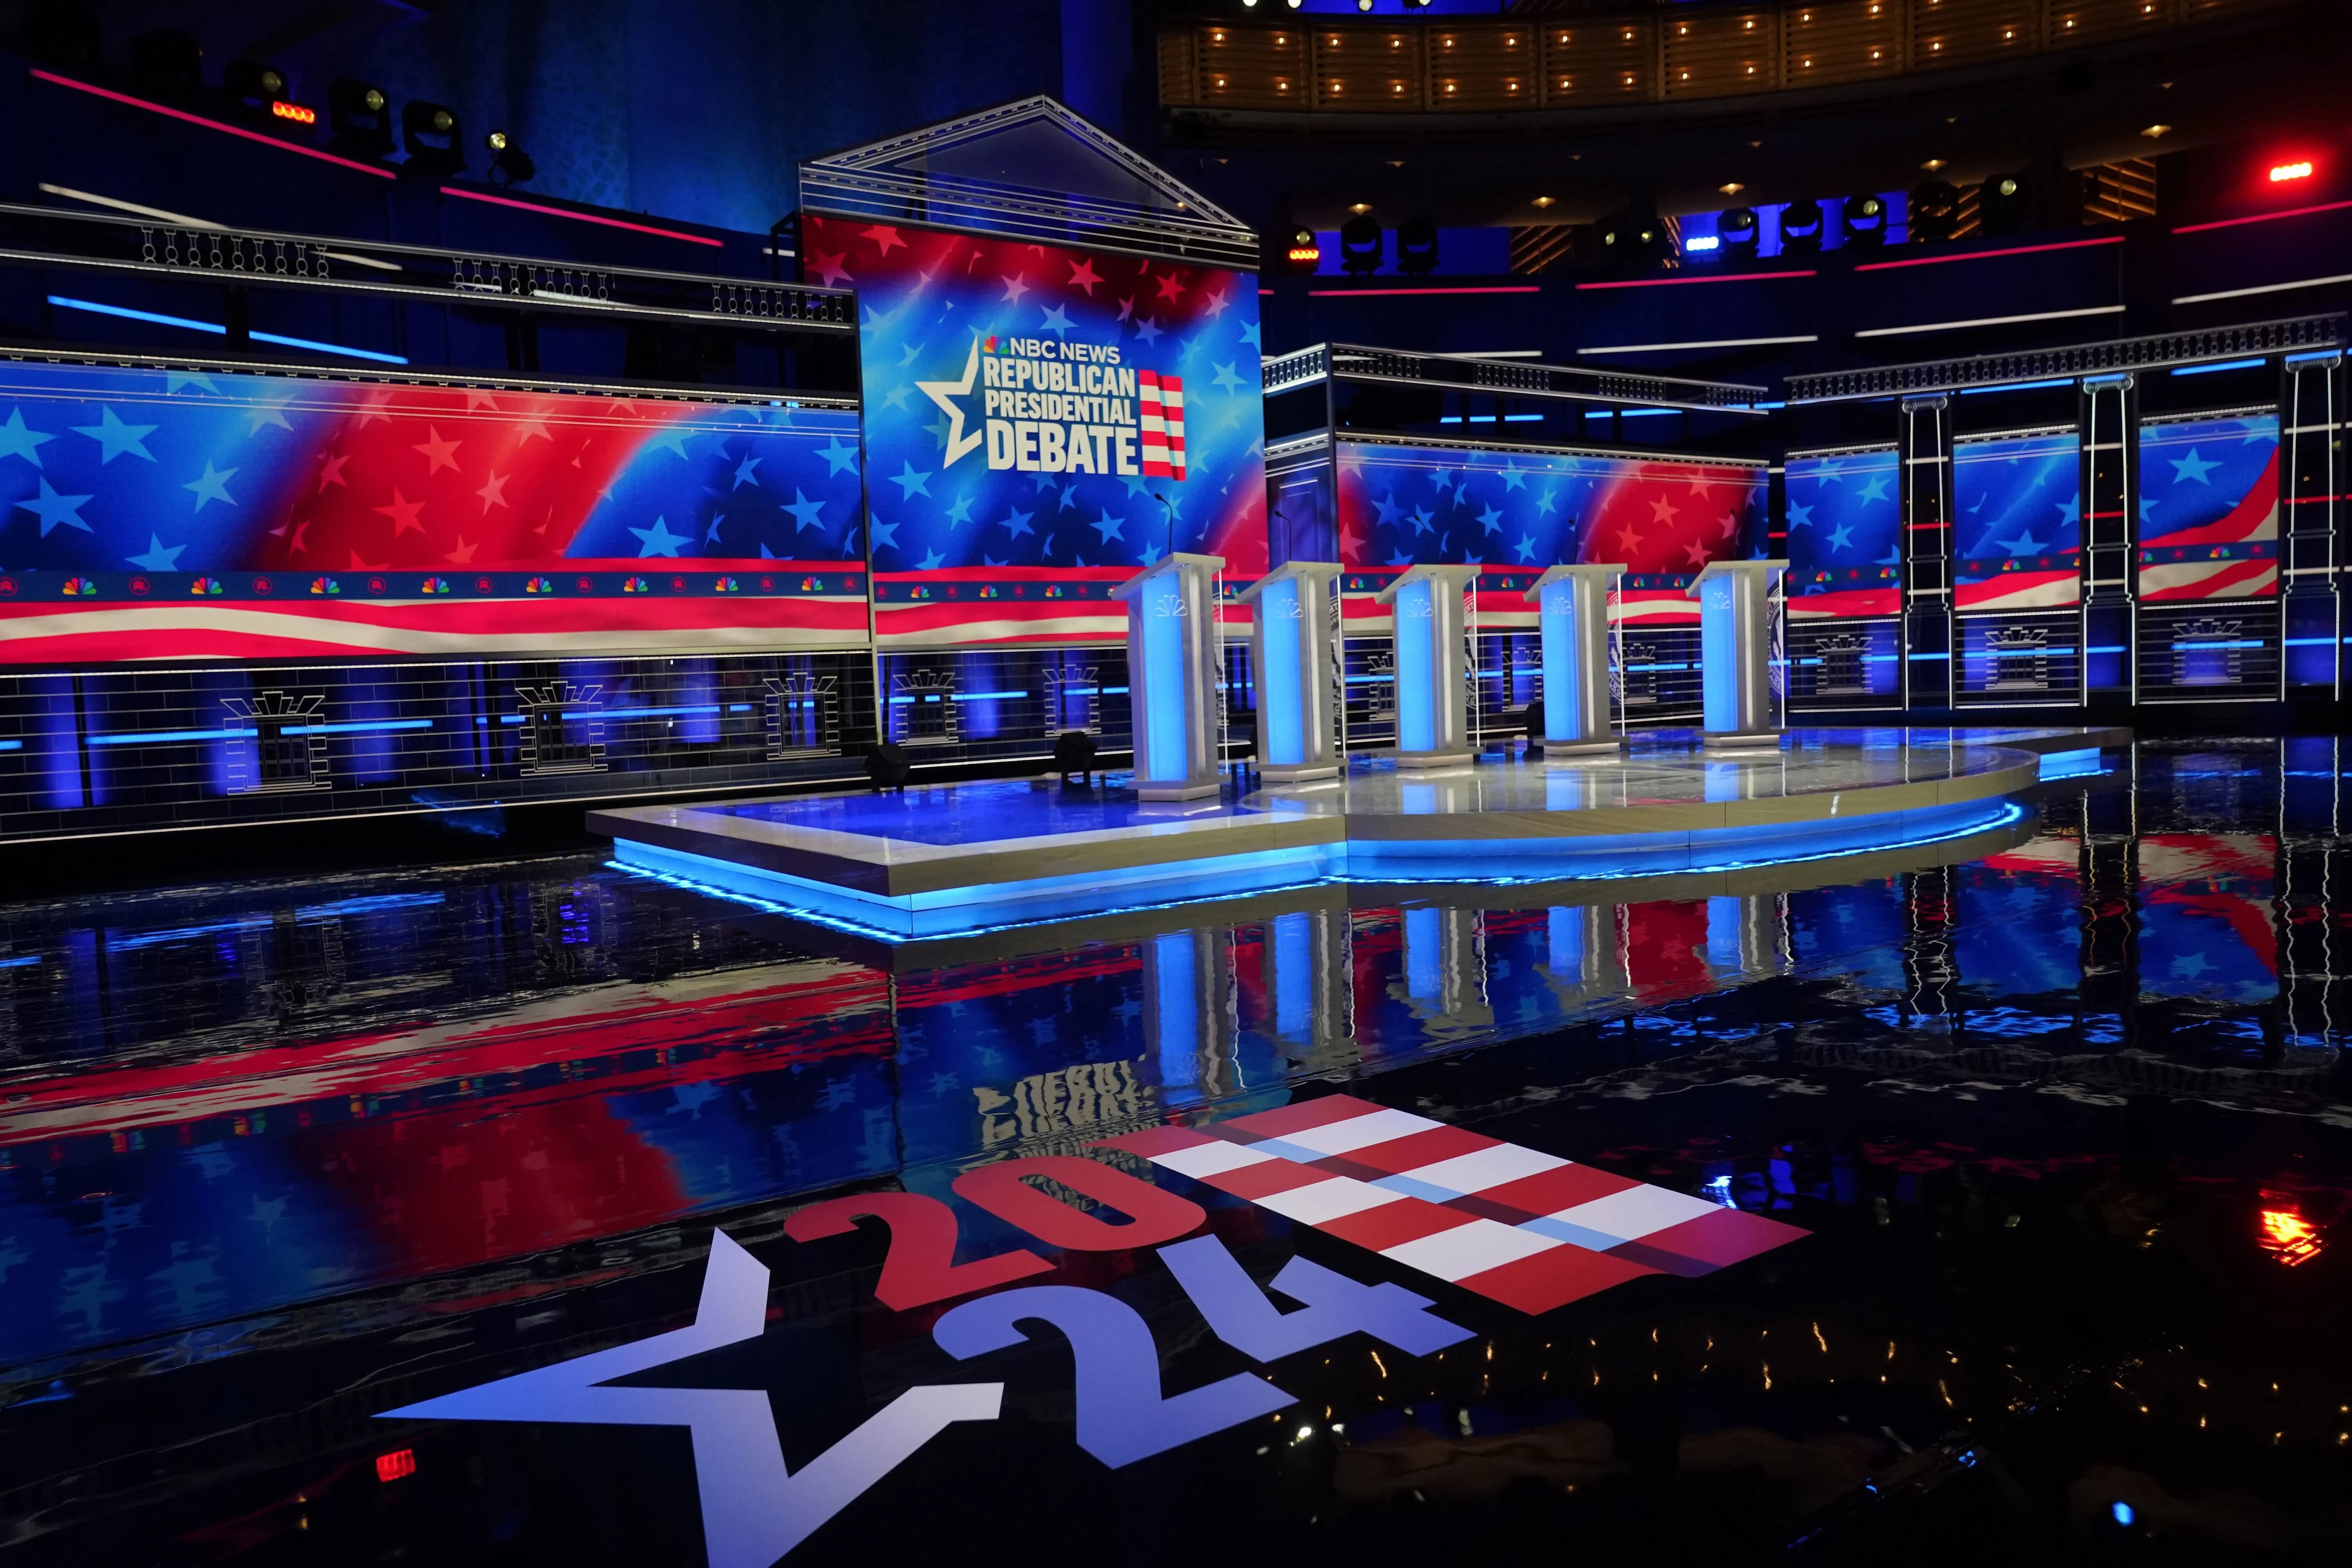 The stage is set for the third Republican presidential debate in Miami on Wednesday night.